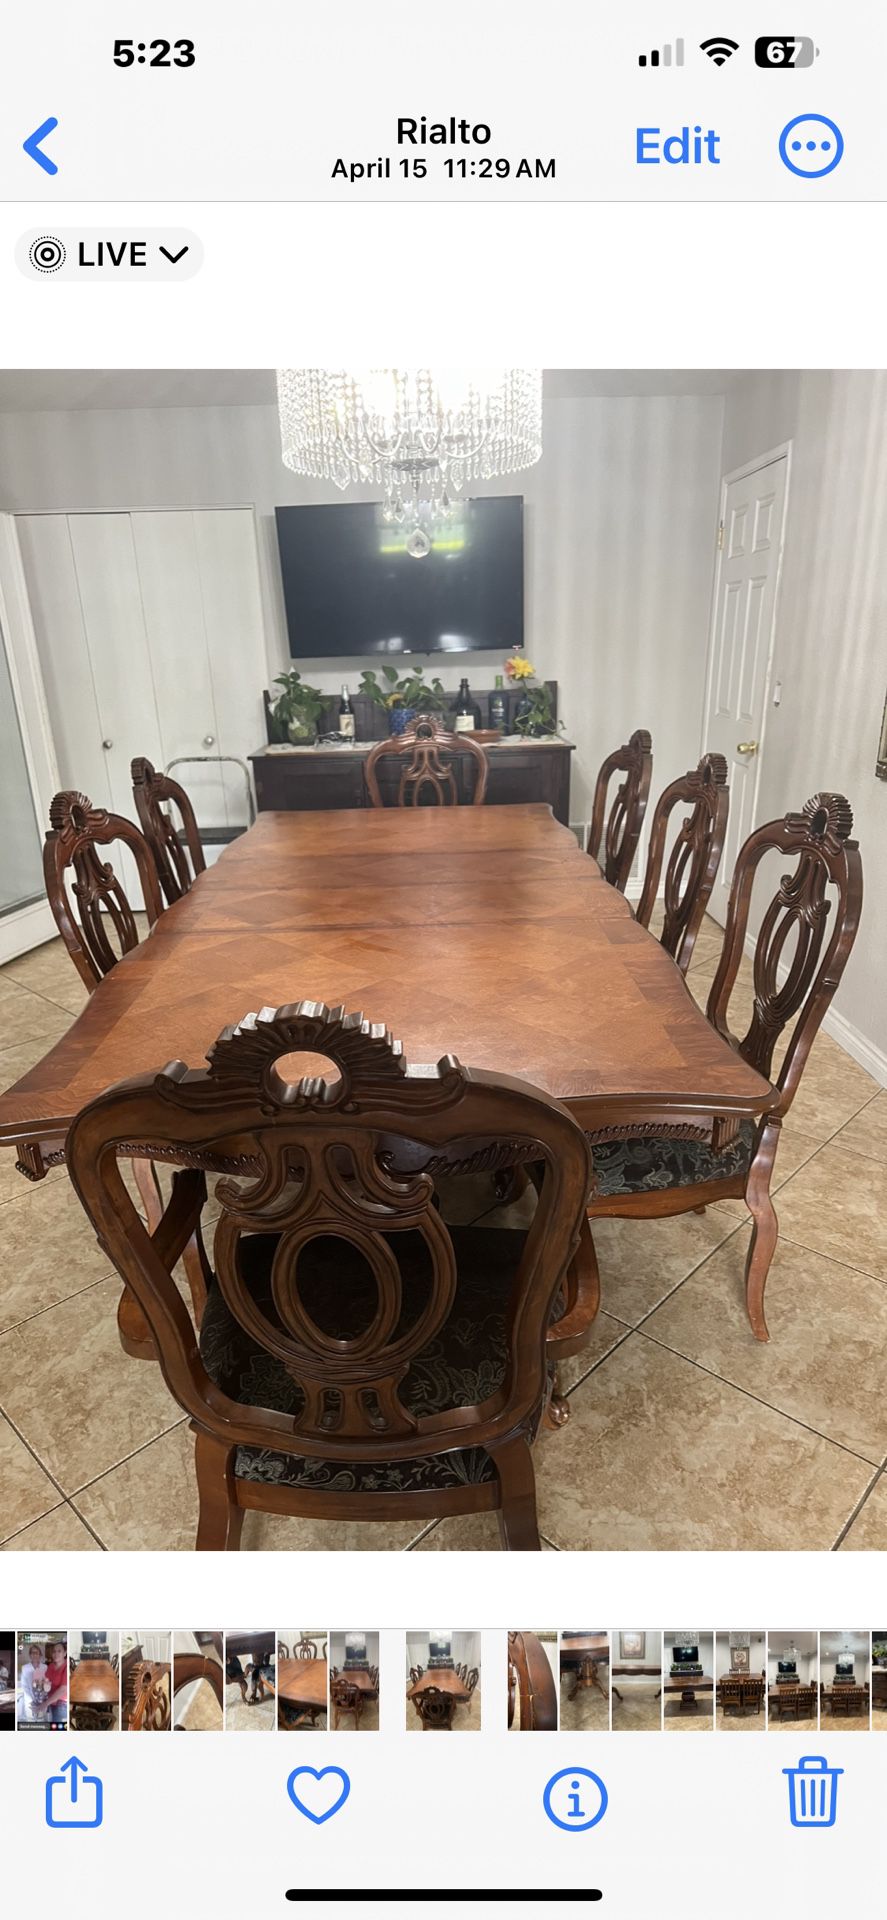 8 Chairs , Dining Room Table